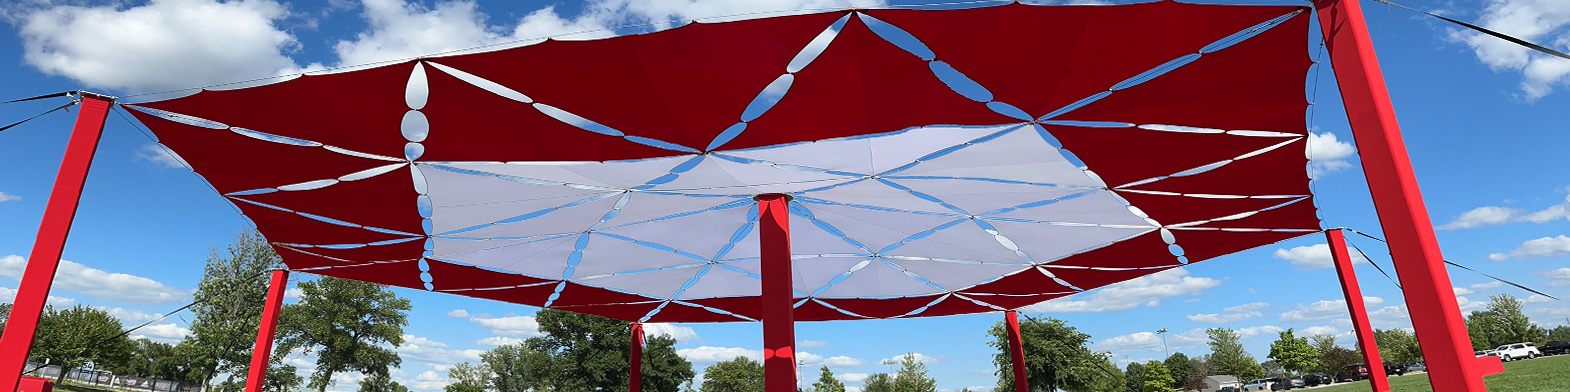 Shade Structure Made Of High Performance Outdoor Stretch Fabric